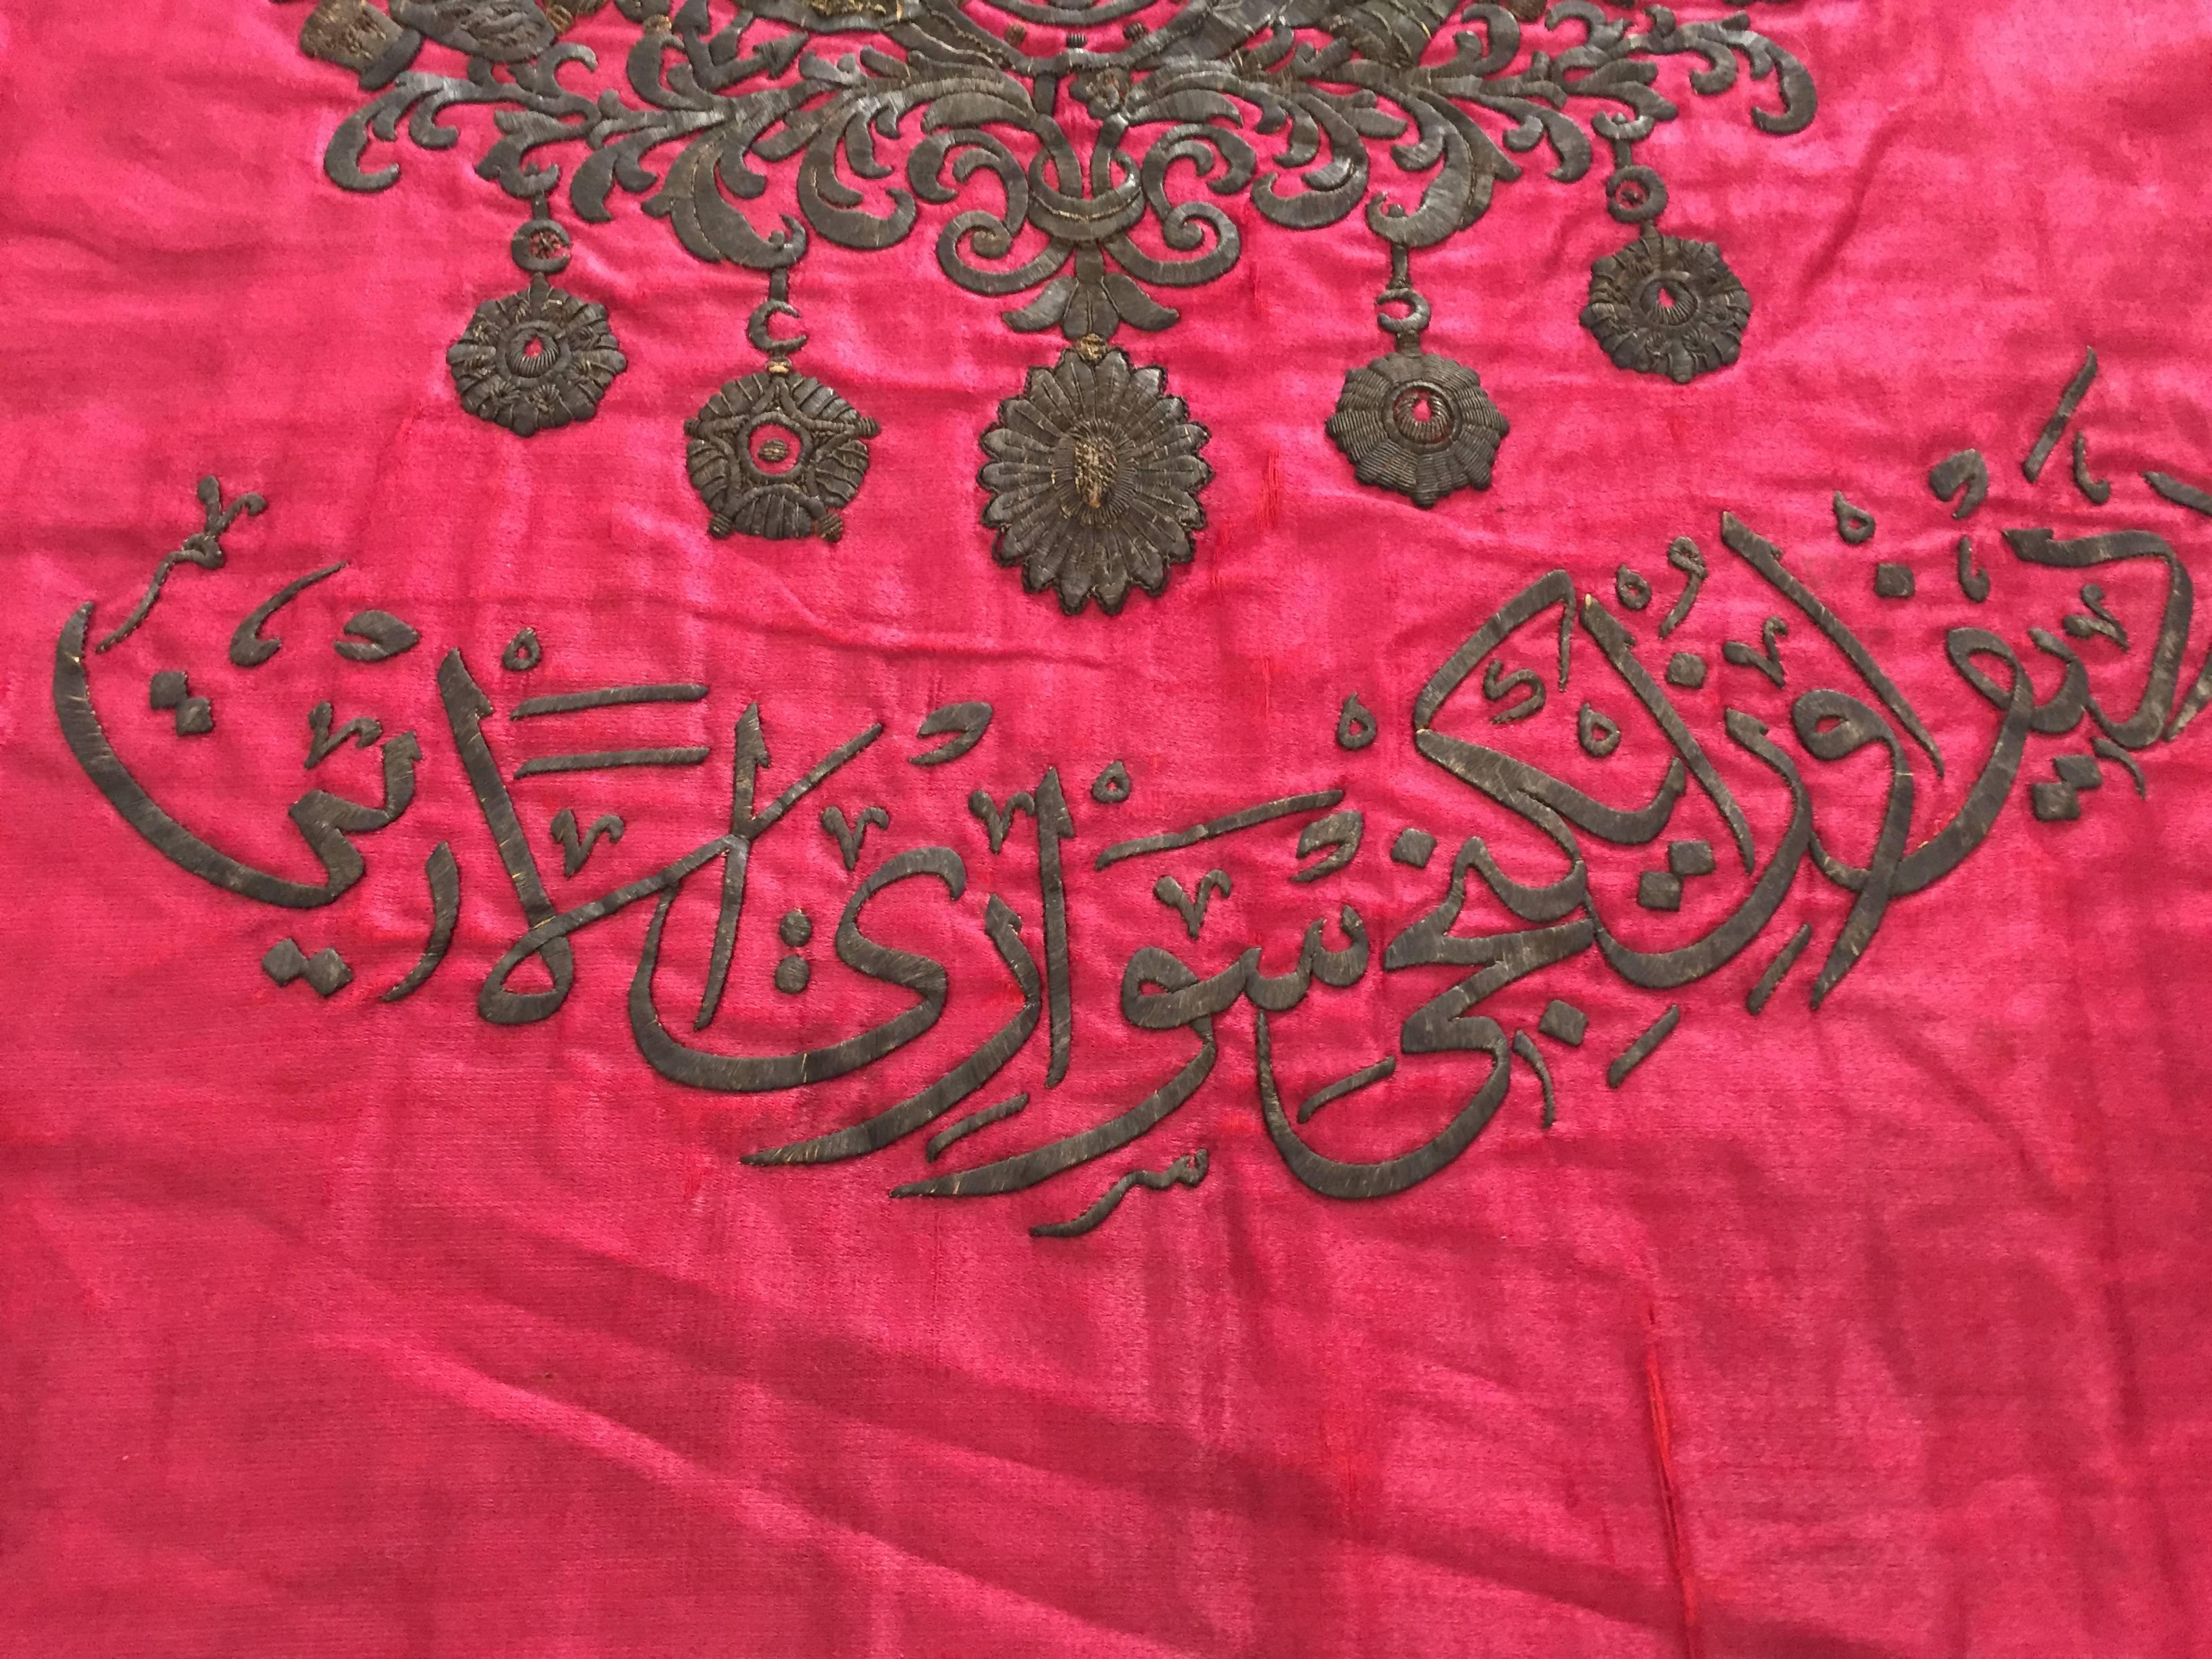 Islamic 19th Century Ottoman Banner with the Tugrah of Sultan Abdulhamid II